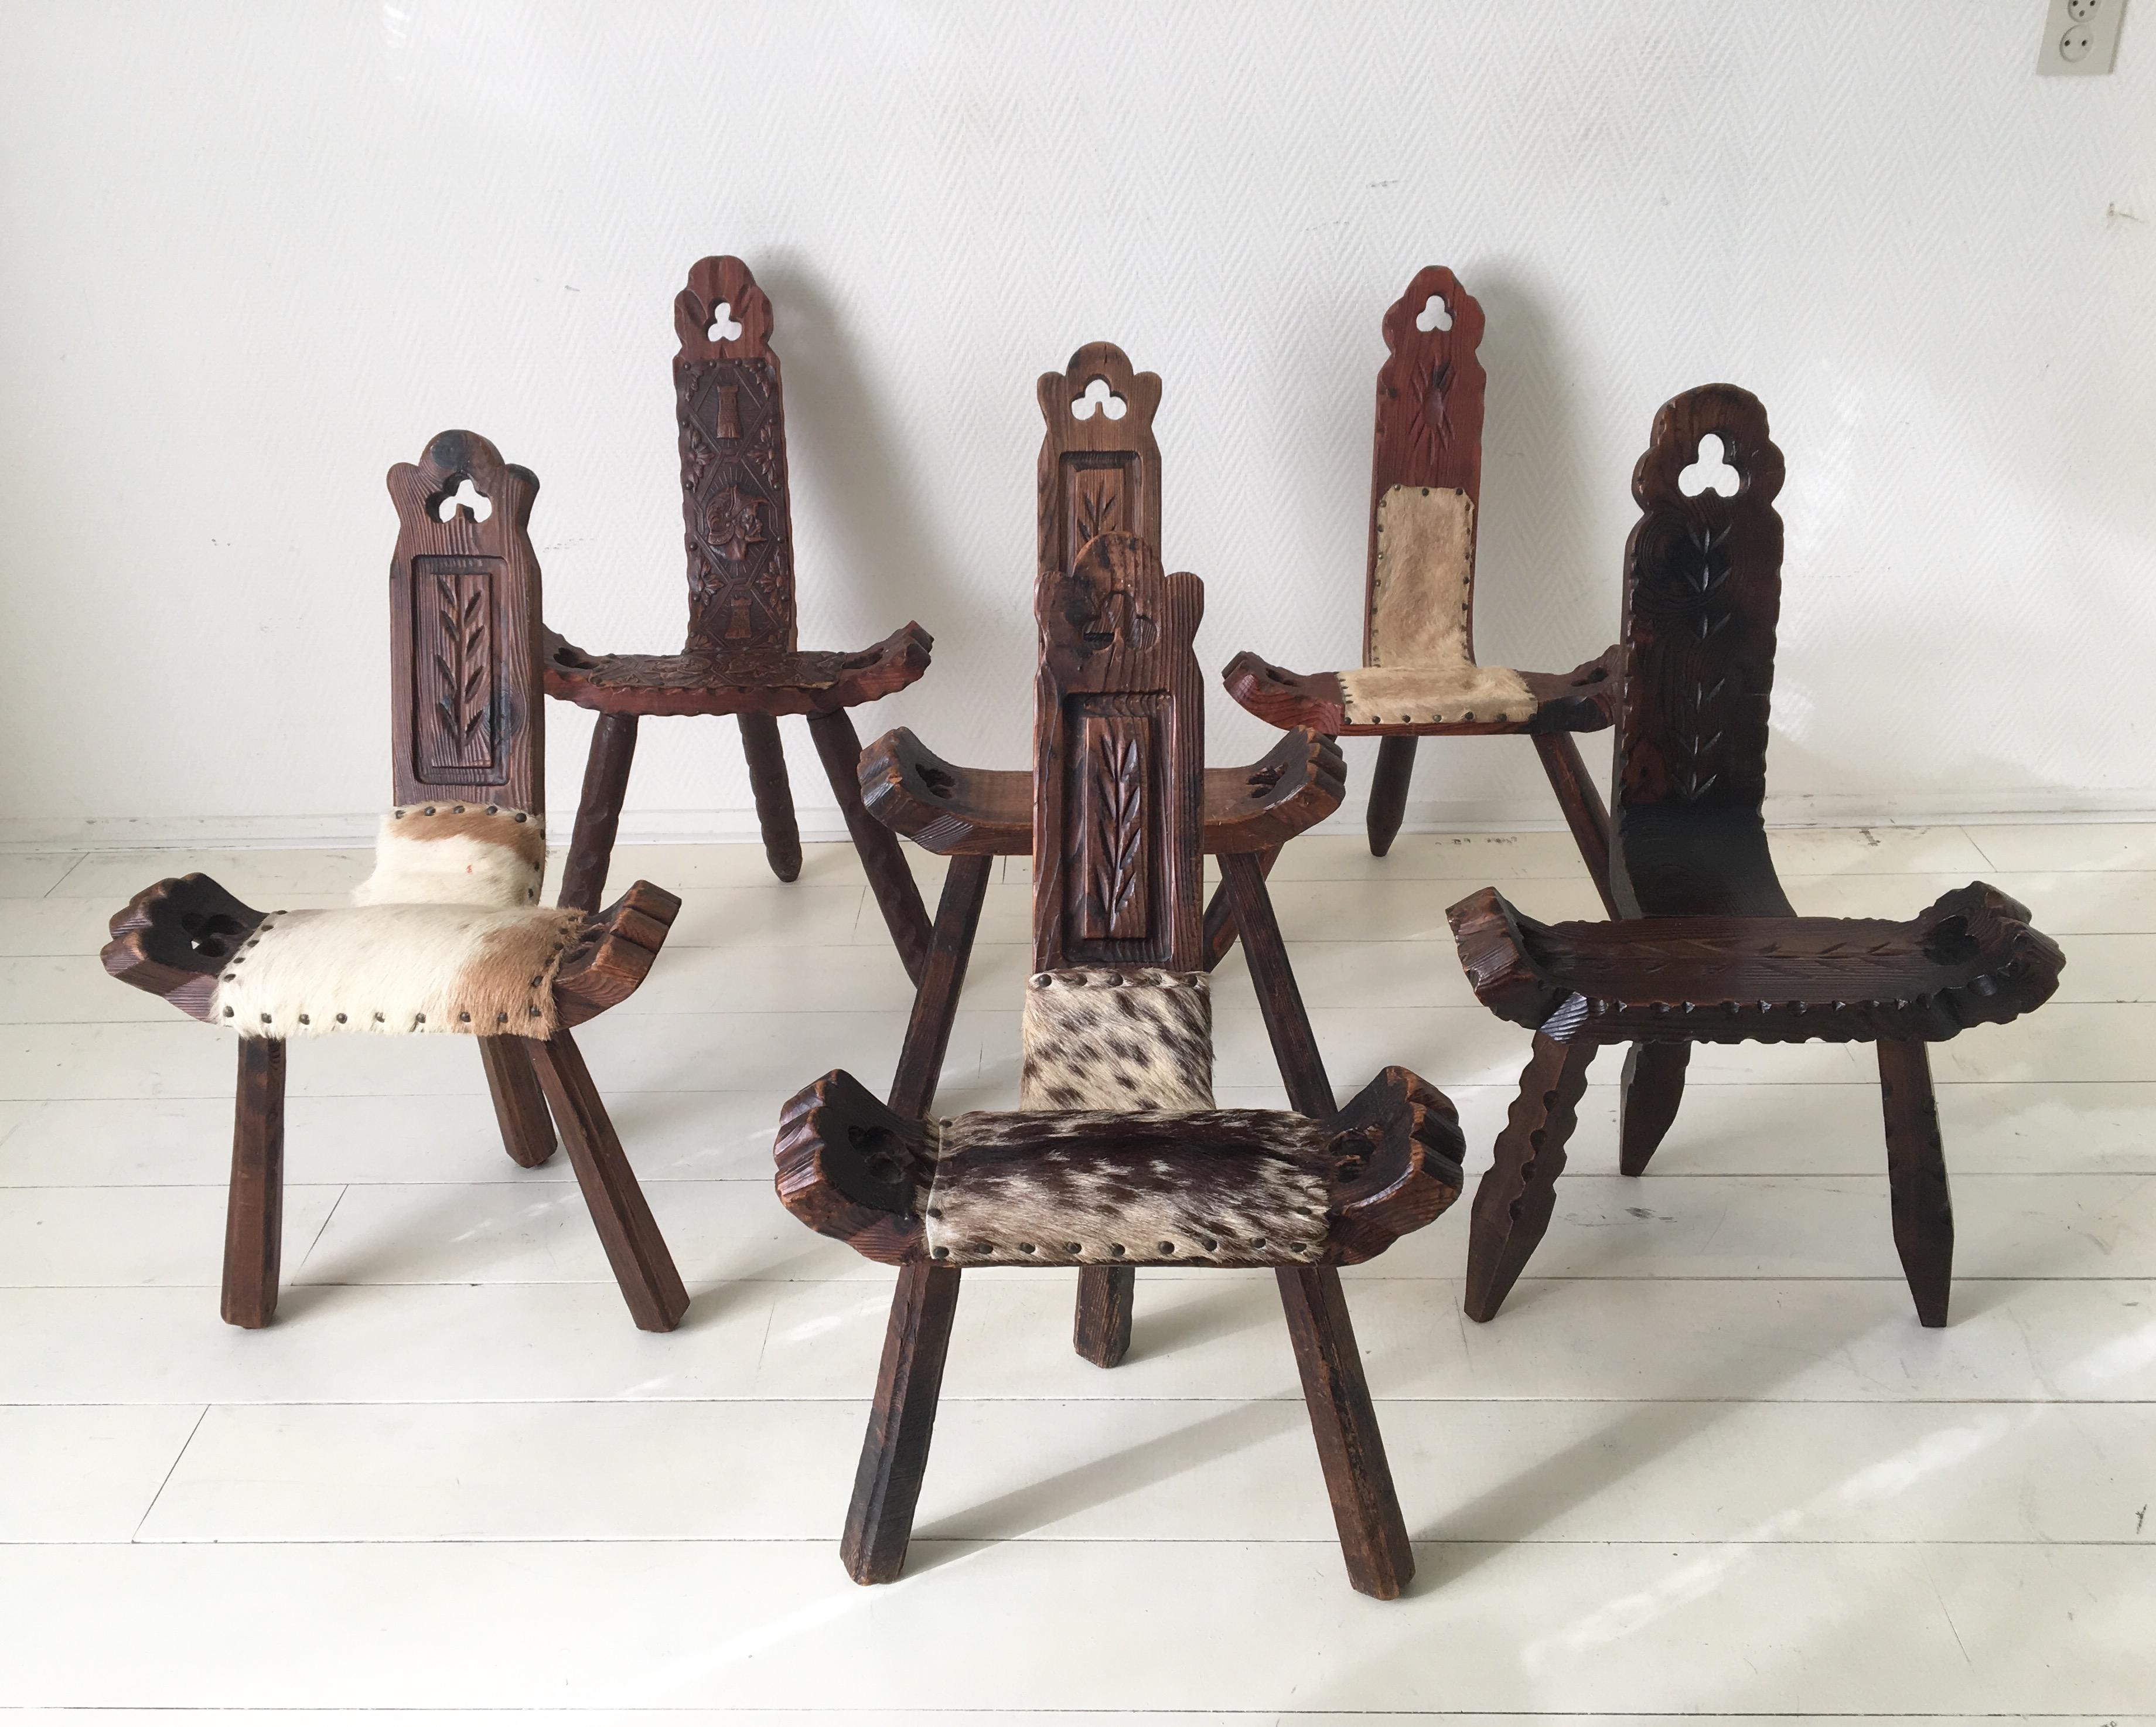 6 gorgeous pieces available. (2 completely in wood, one in wood and leather and 3 with hide). The chairs/stools are in good condition, with some signs of age and use (see: images). The chairs feature a patented fixing device (see: image). Easy to